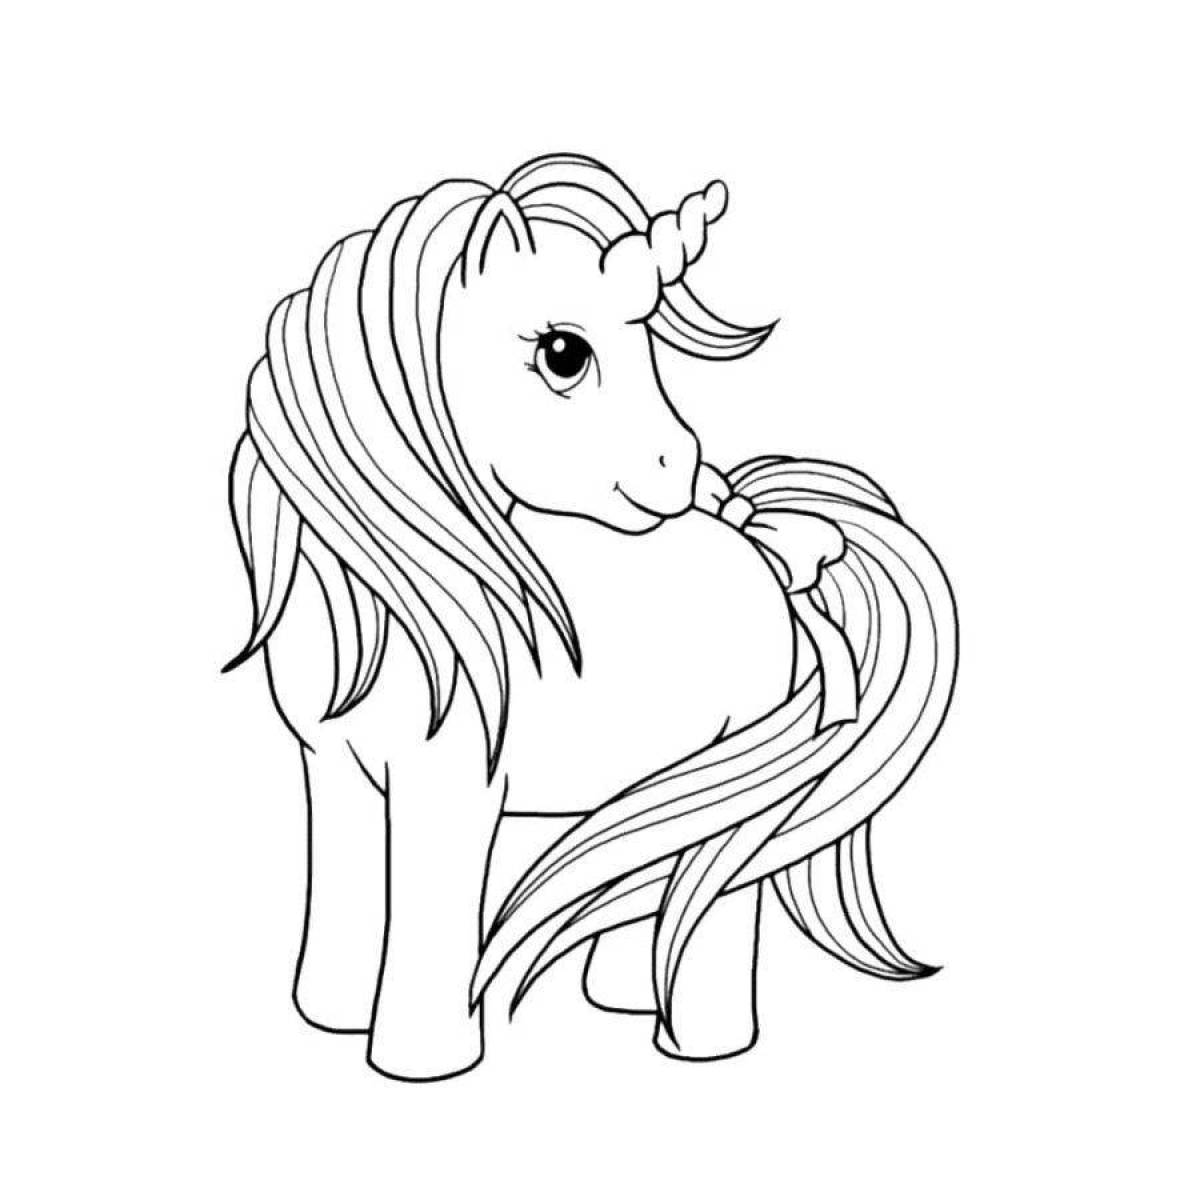 Elegant coloring drawing of a unicorn